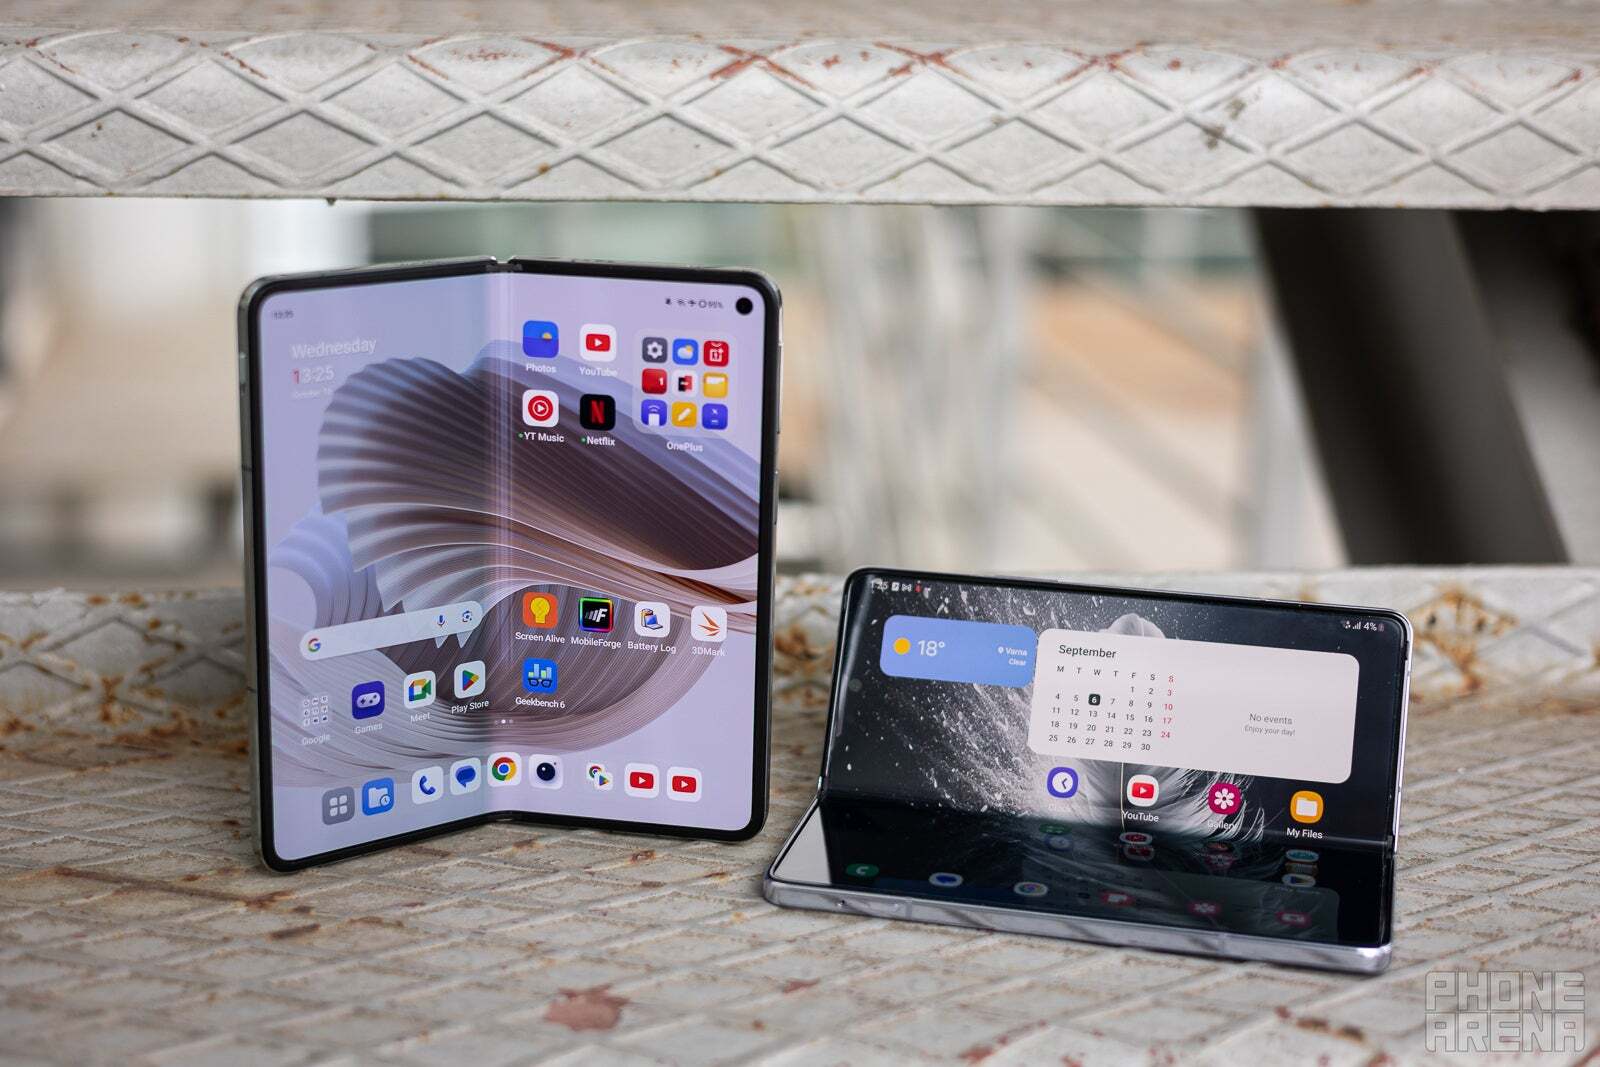 Foldable phones already have stunning displays, inside and out - Apple hasn't abandoned the foldable iPhone, it just doesn't need one